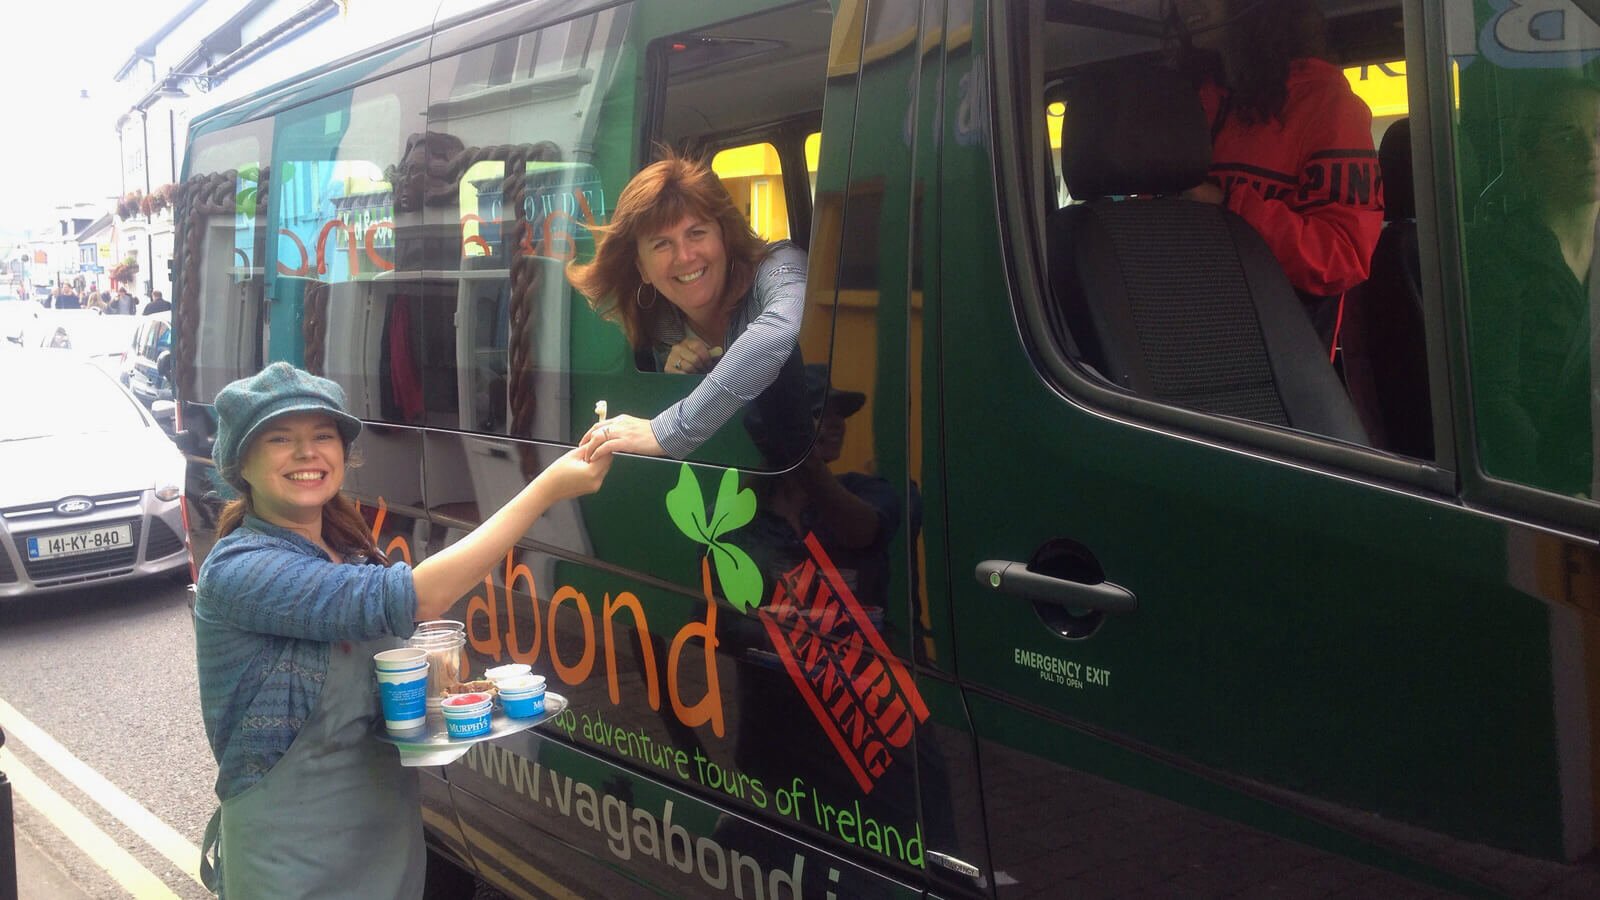 Murphy's Ice Cream staff giving samples to Vagabond guest through tour vehicle window in Dingle, Ireland